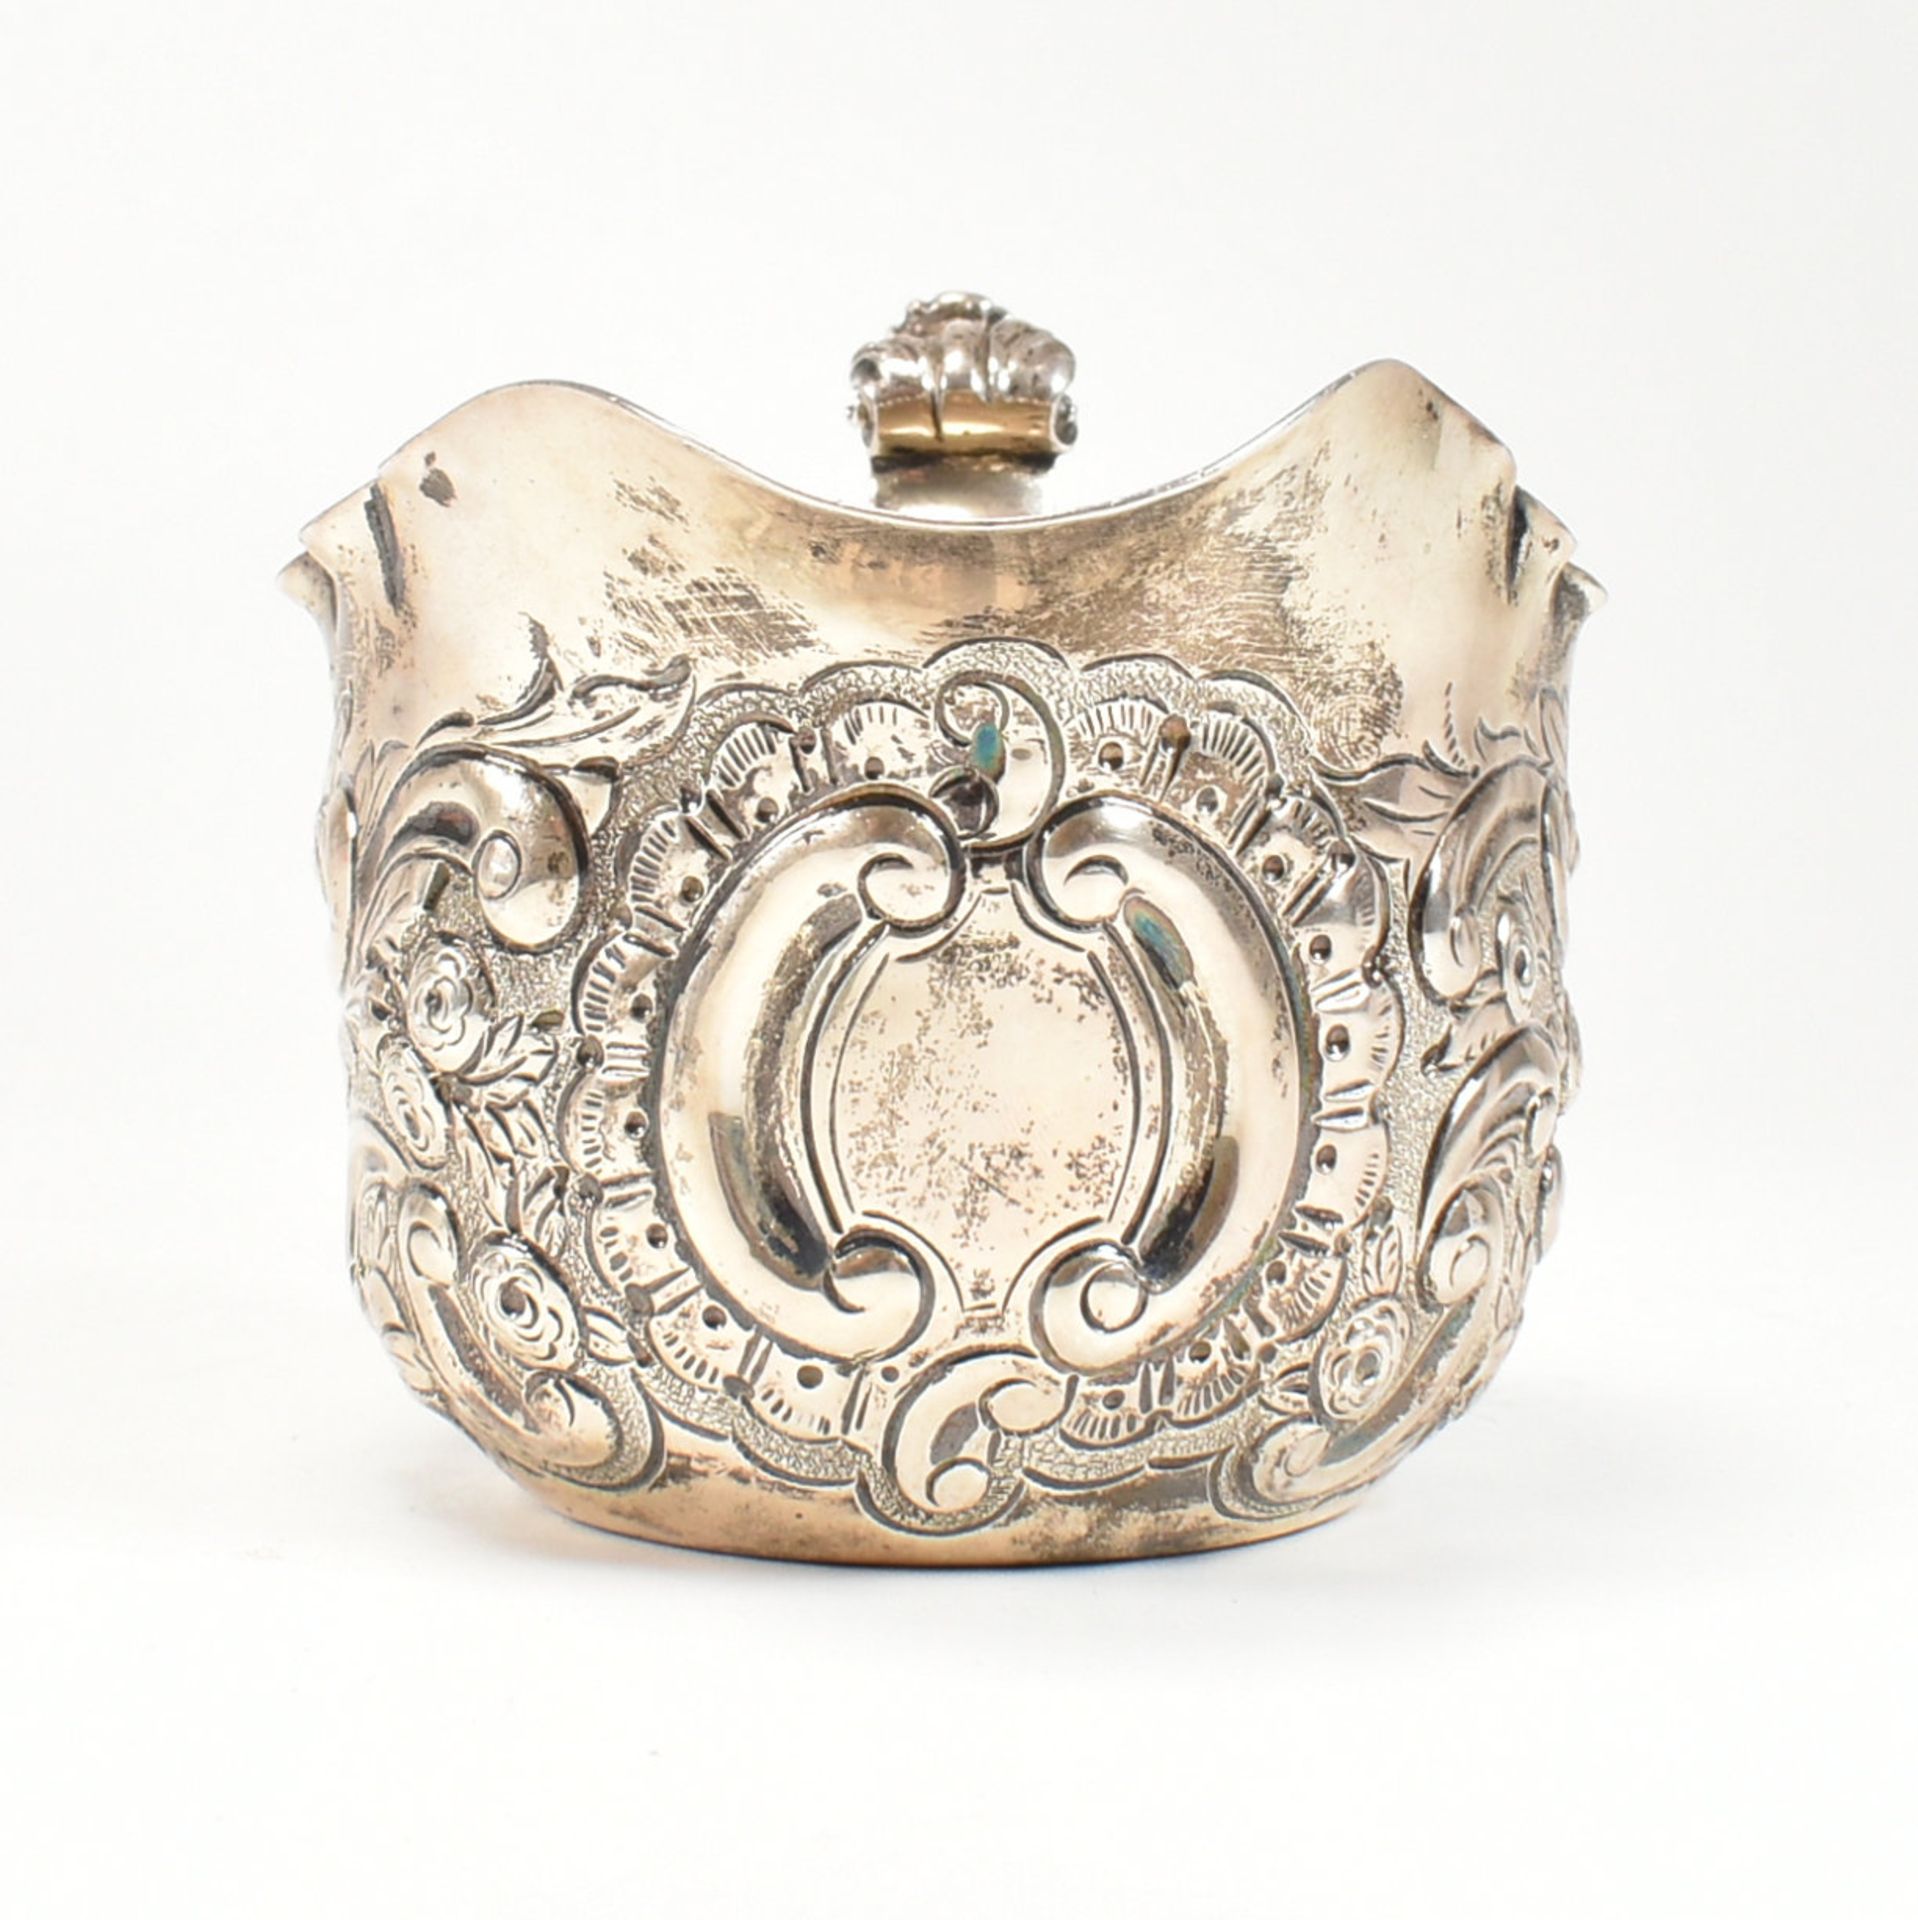 EARLY 20TH CENTURY HALLMARKED SILVER CREAMER - Image 2 of 7